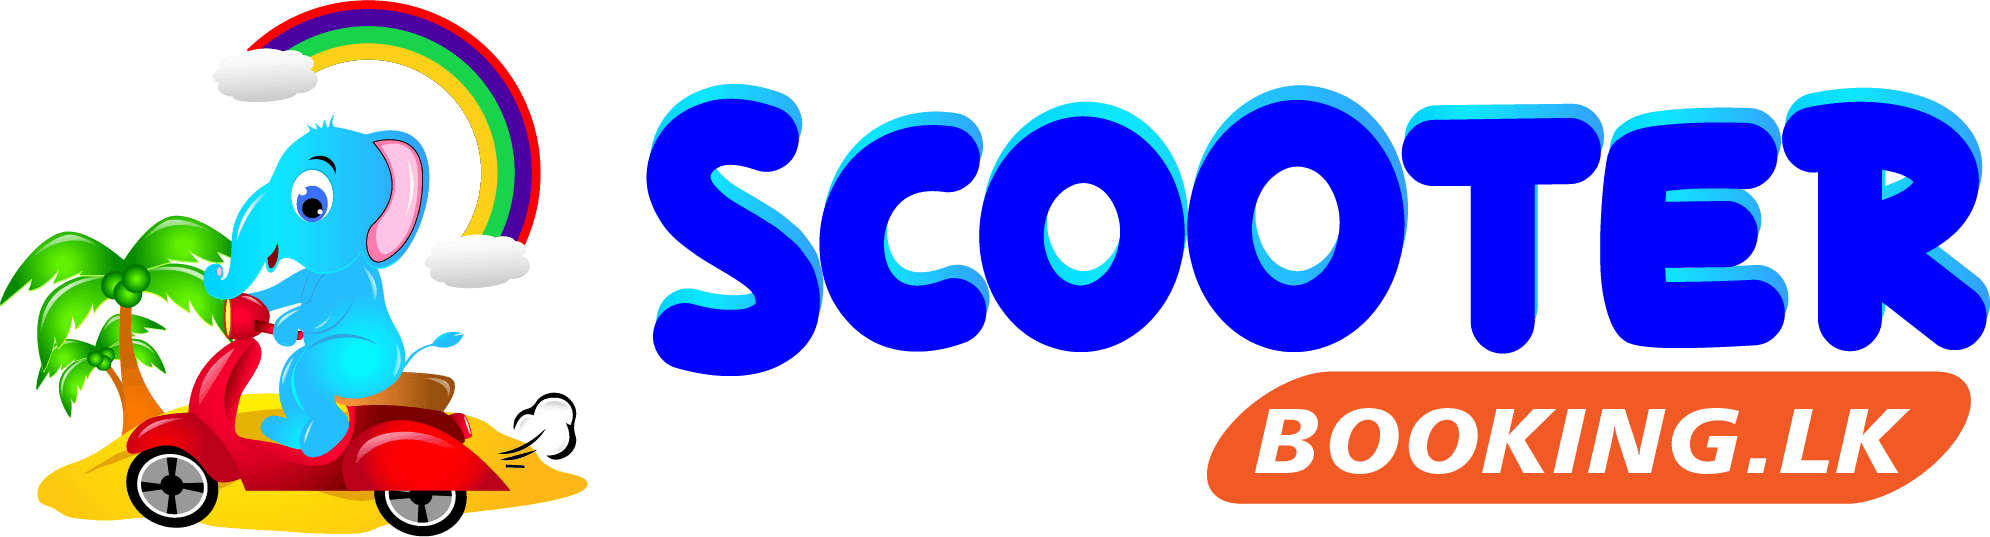 Scooter Booking and Rental in Sri Lanka